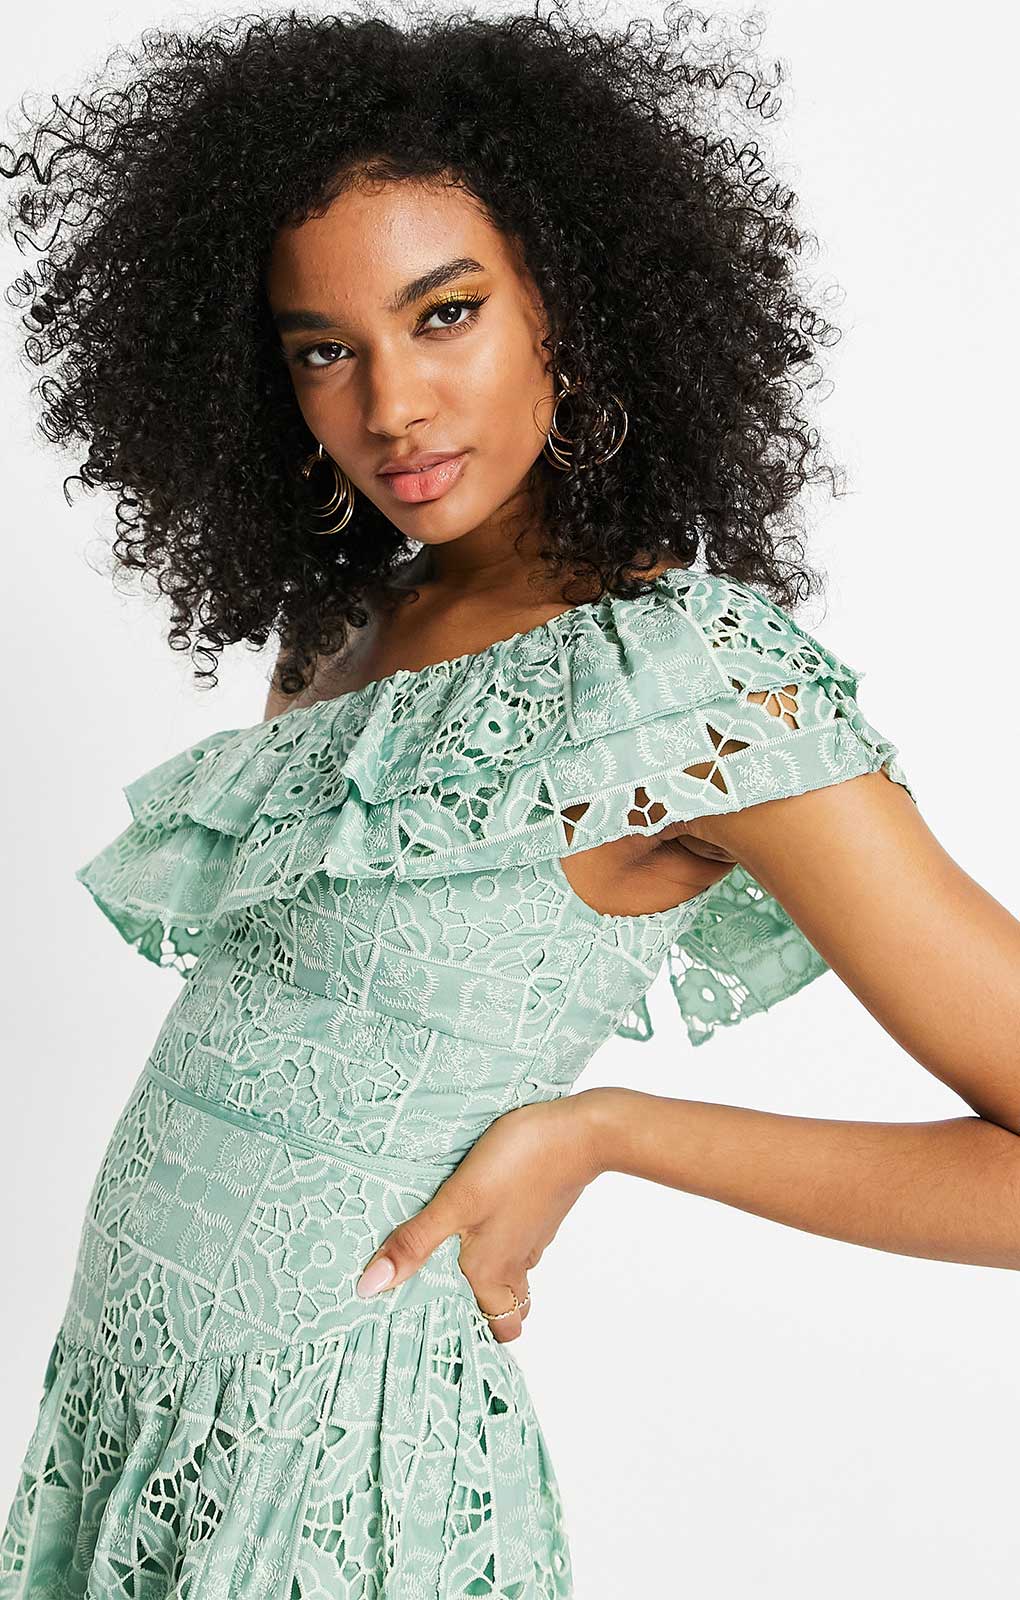 Asos Design One Shoulder Midi Dress In Patched Lace In Sage Green product image